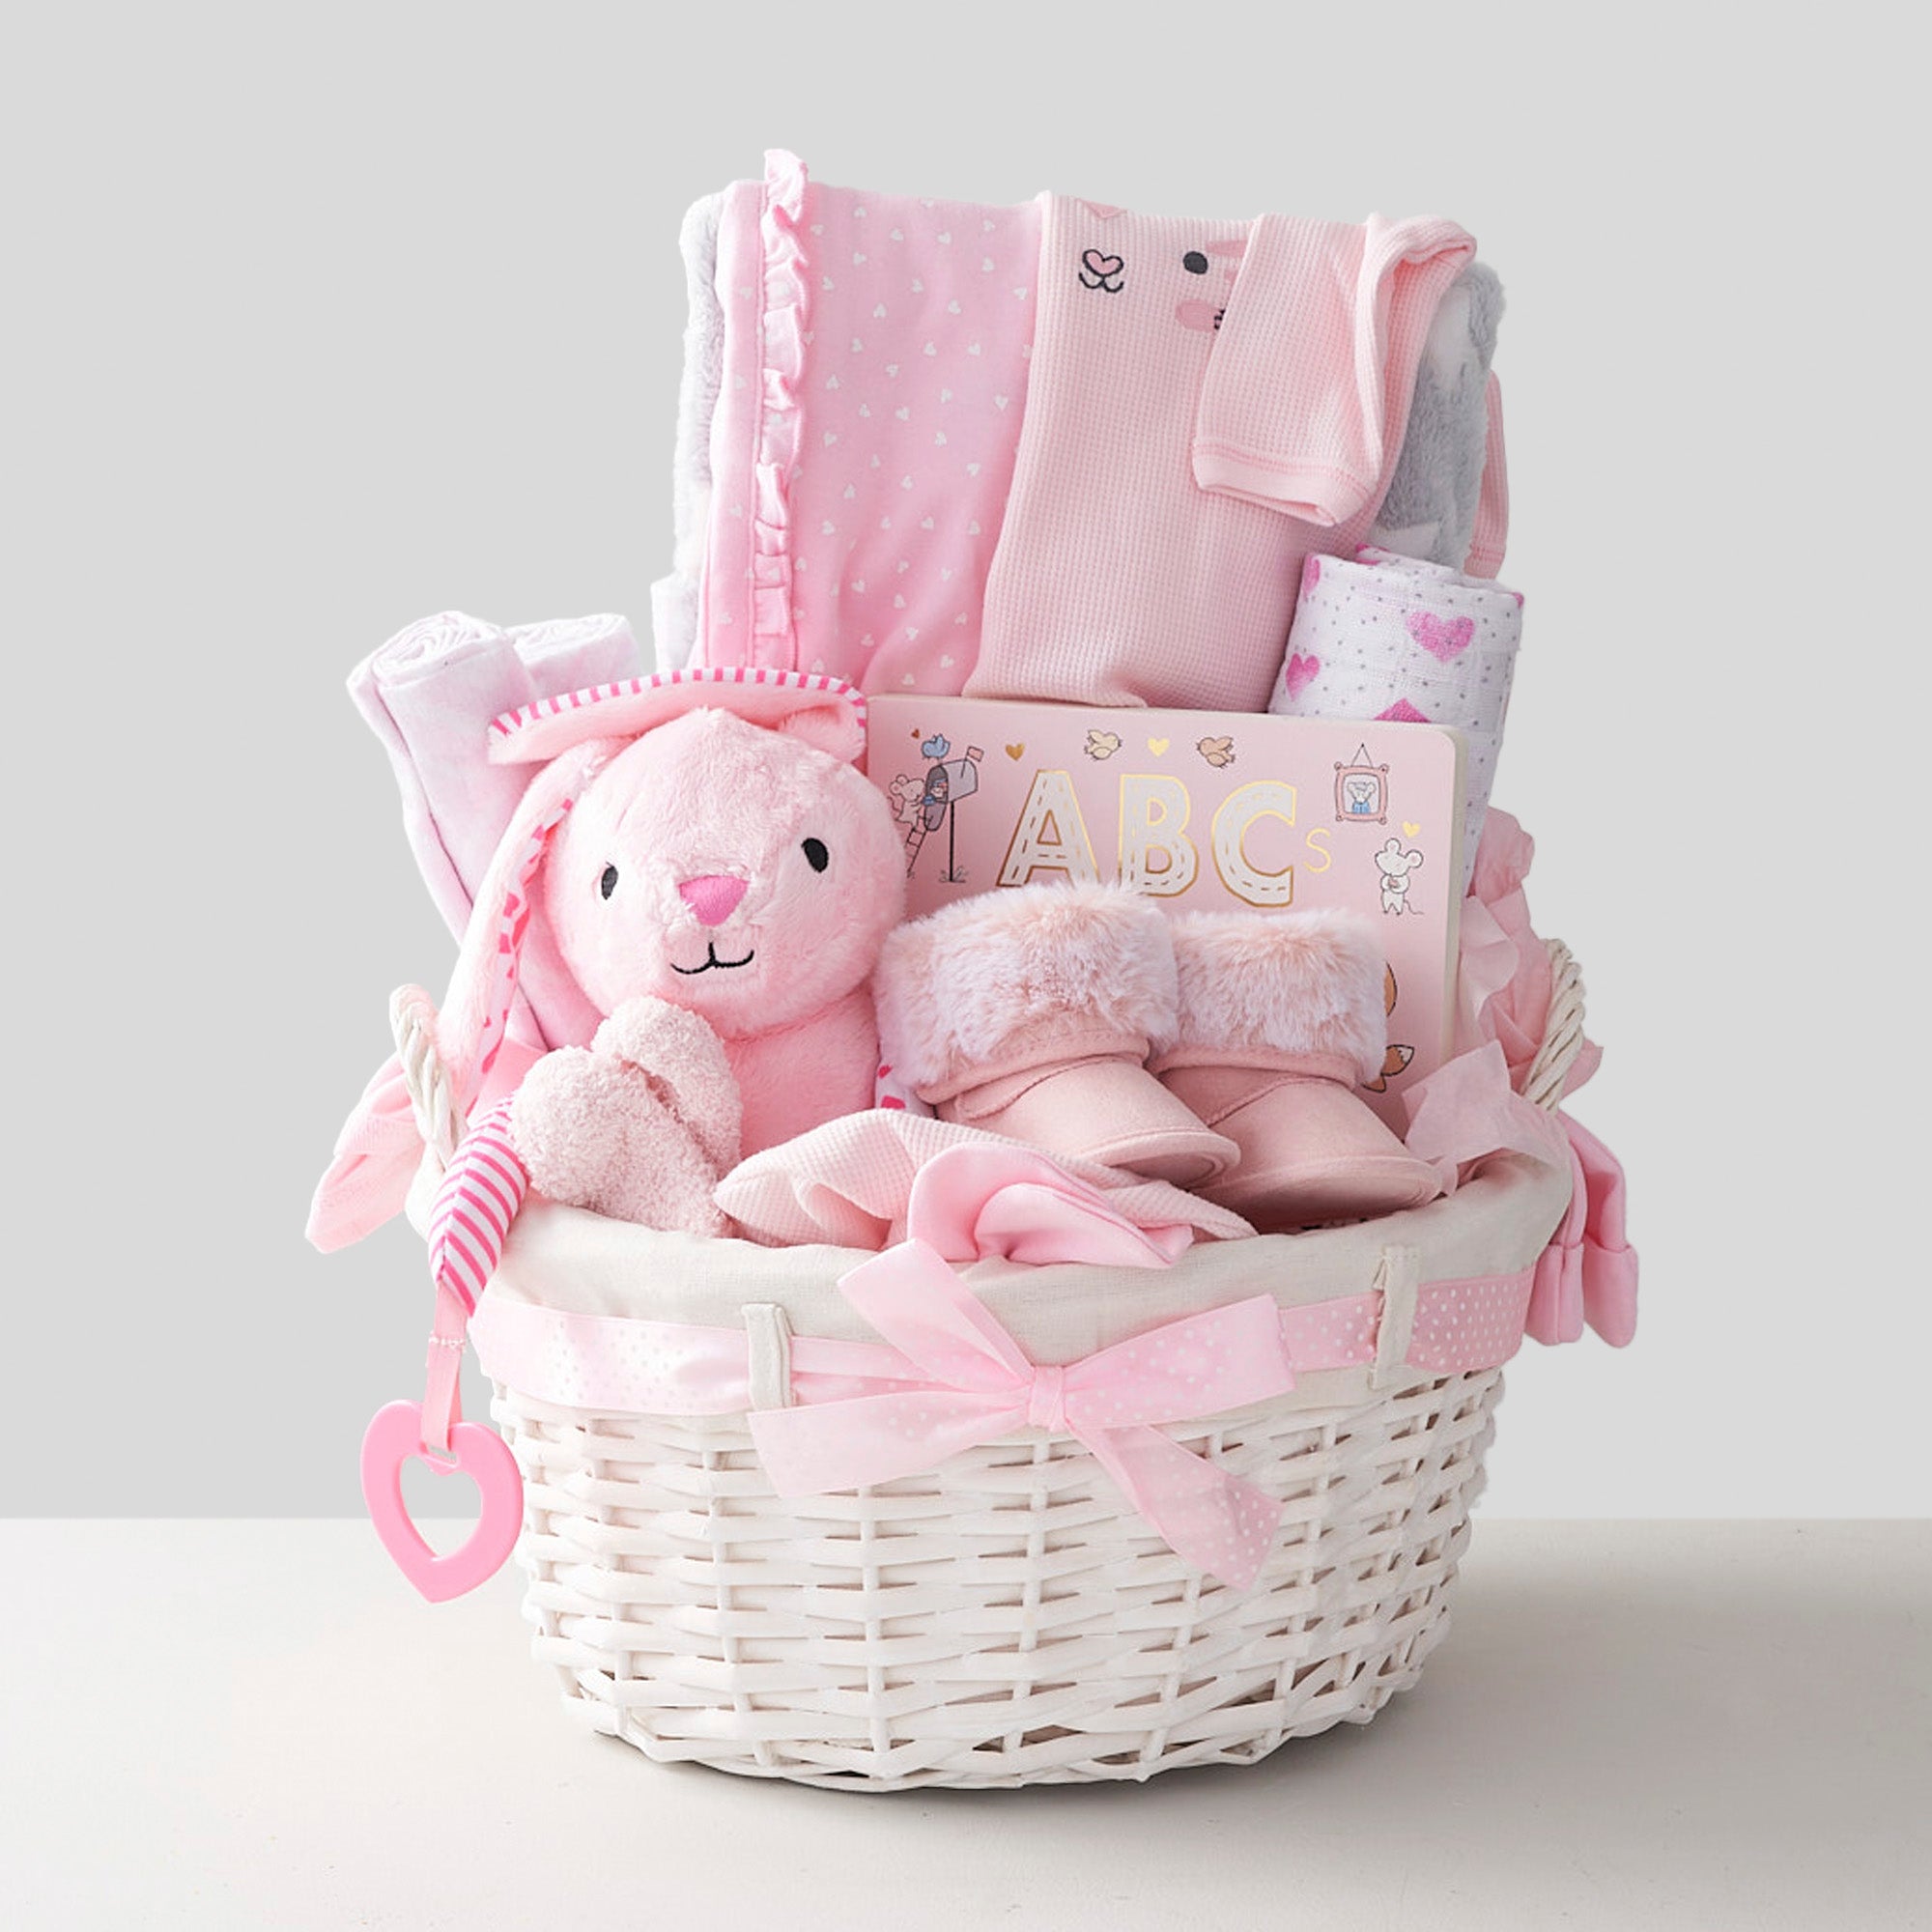 Pink baby basket for newborn with teddy bear, book, clothes, pajamas, toys and shoes